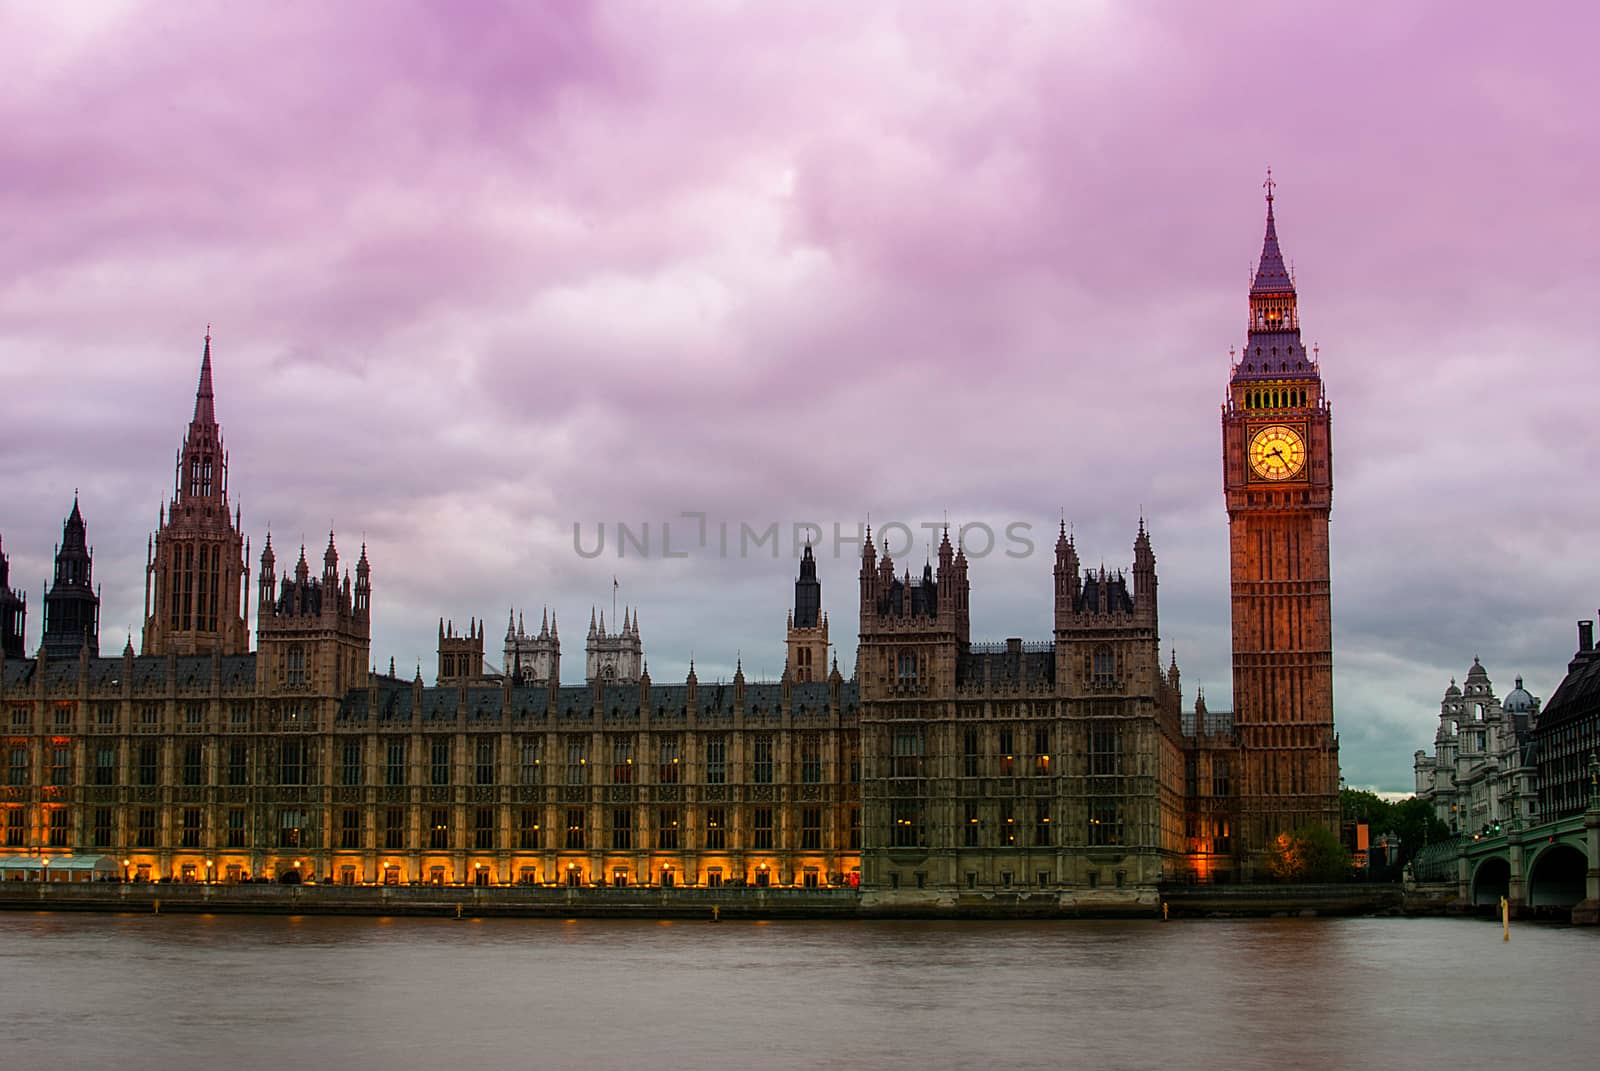 Big Ben and Houses of parliament at dusk by Dessie_bg